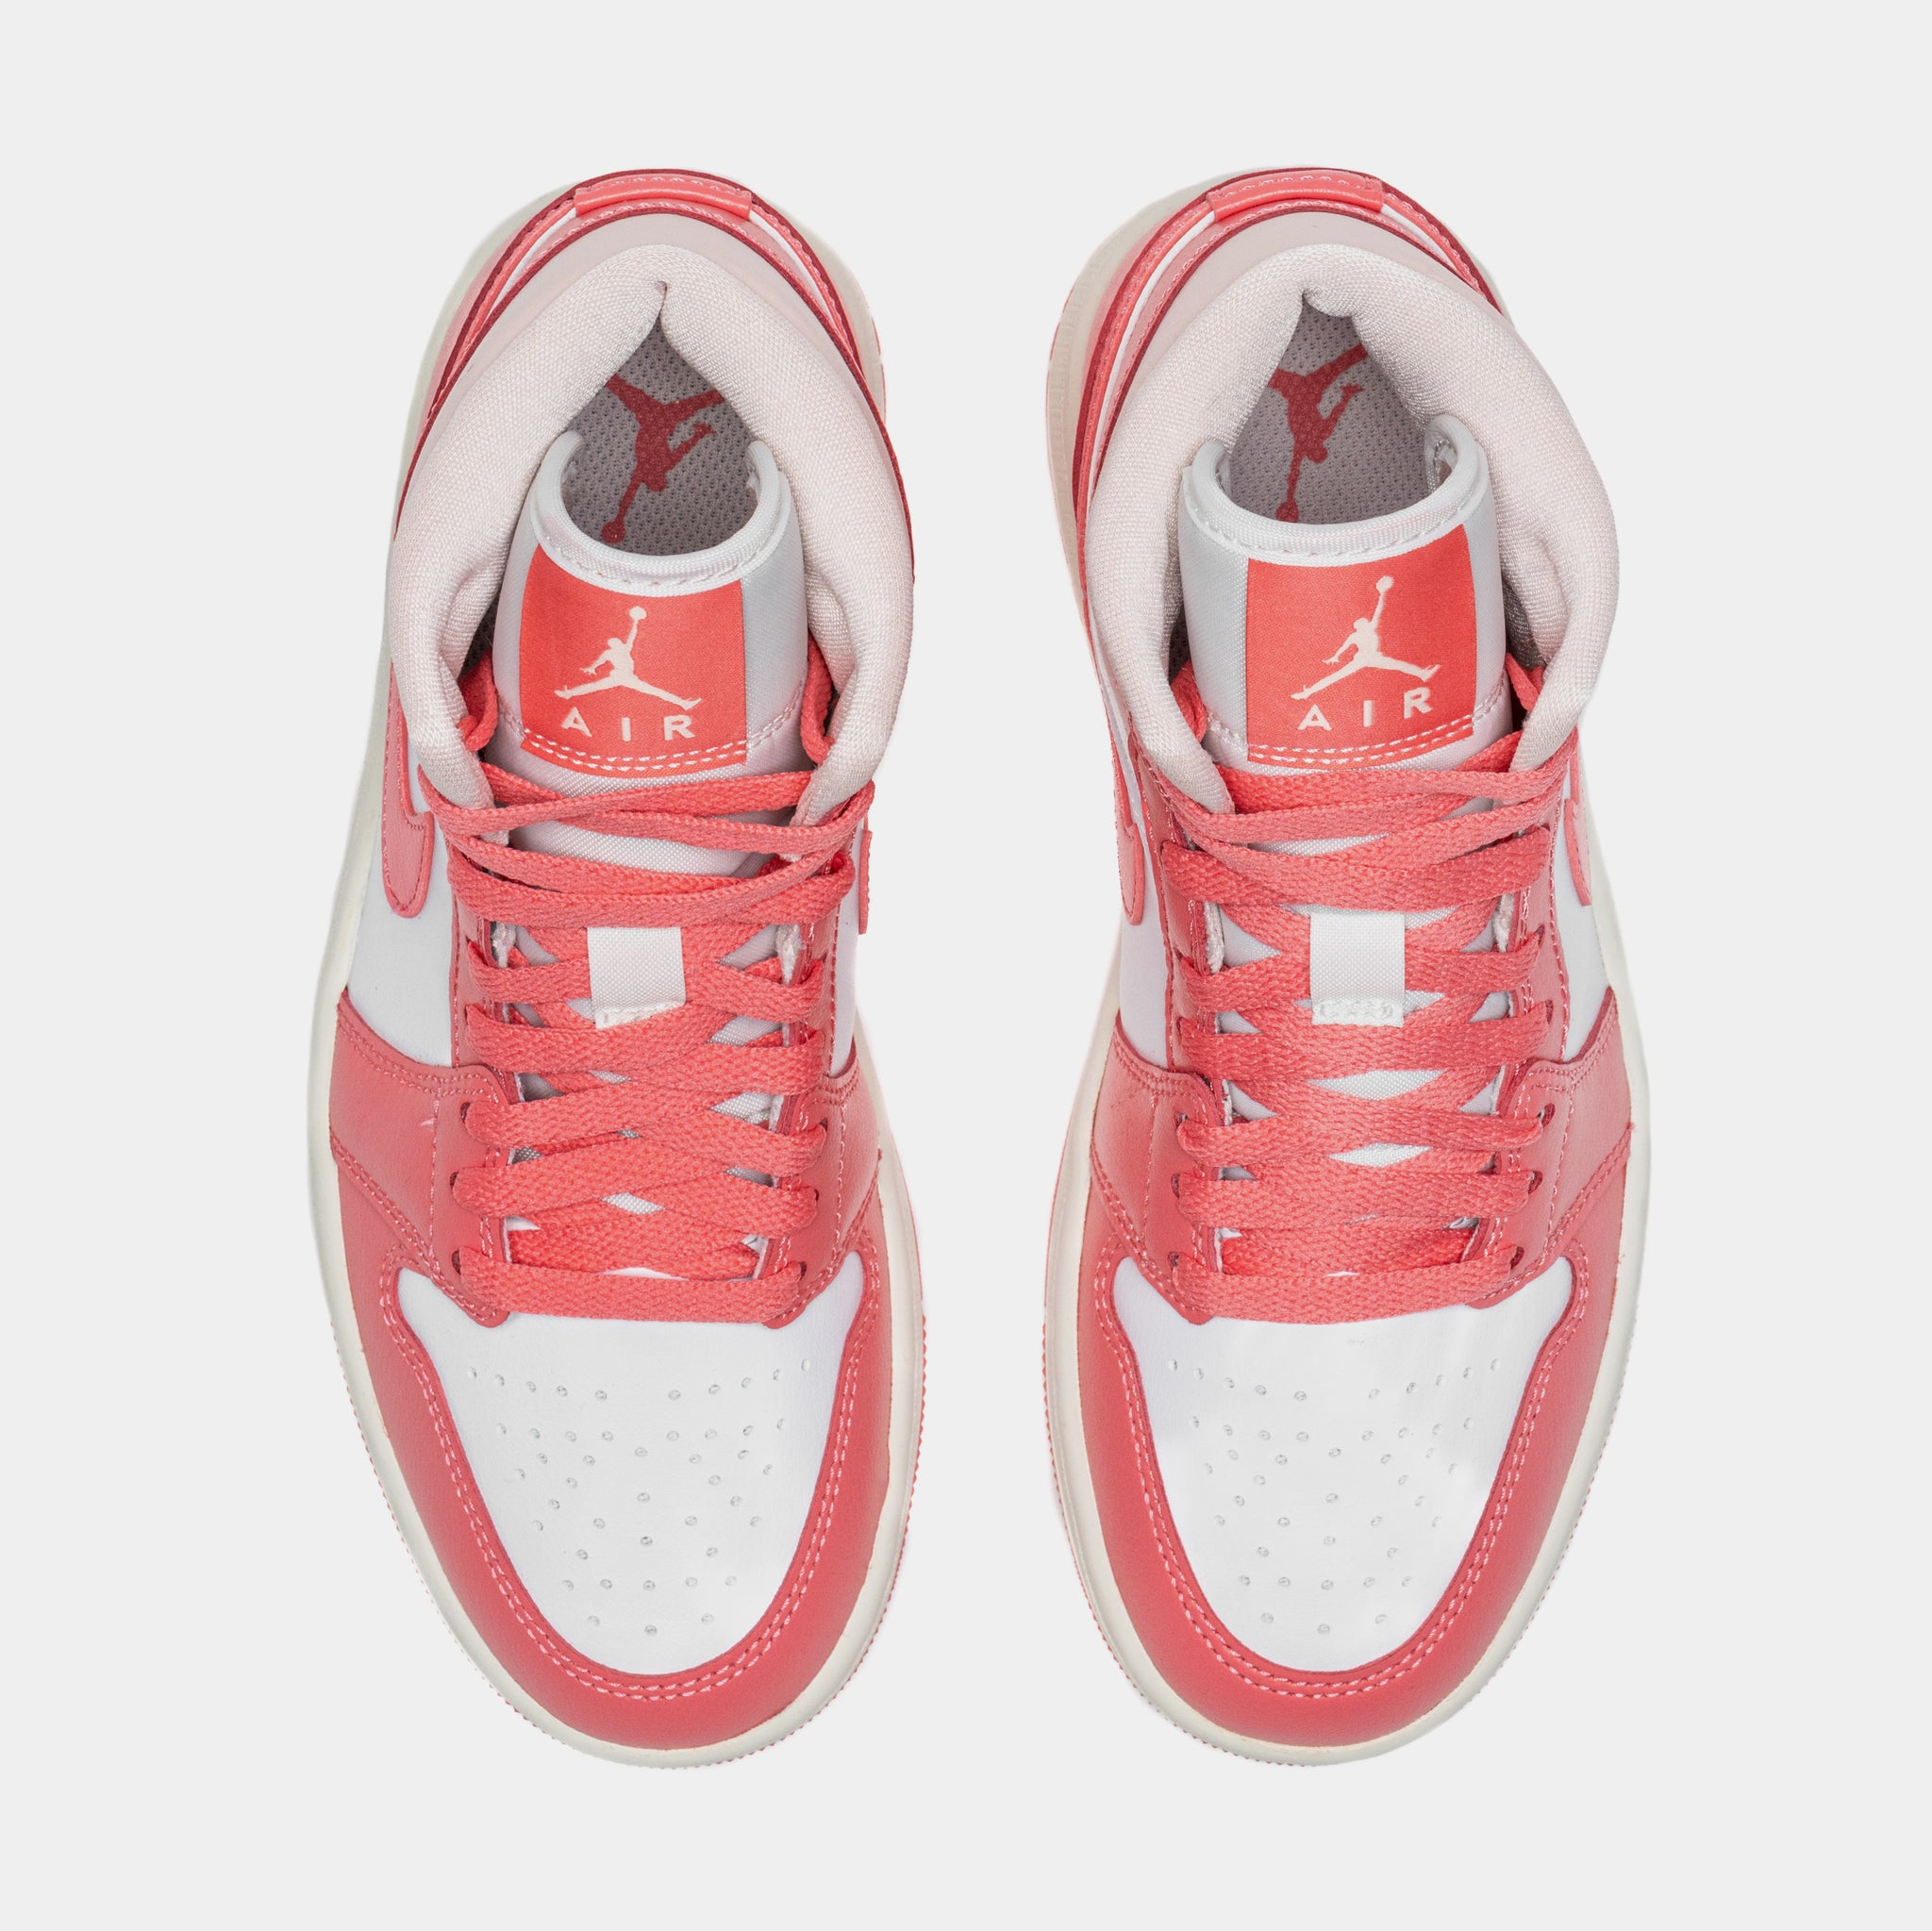 Air Jordan 1 Retro Mid Strawberries and Cream Womens Lifestyle Shoes  (Pink/Beige)